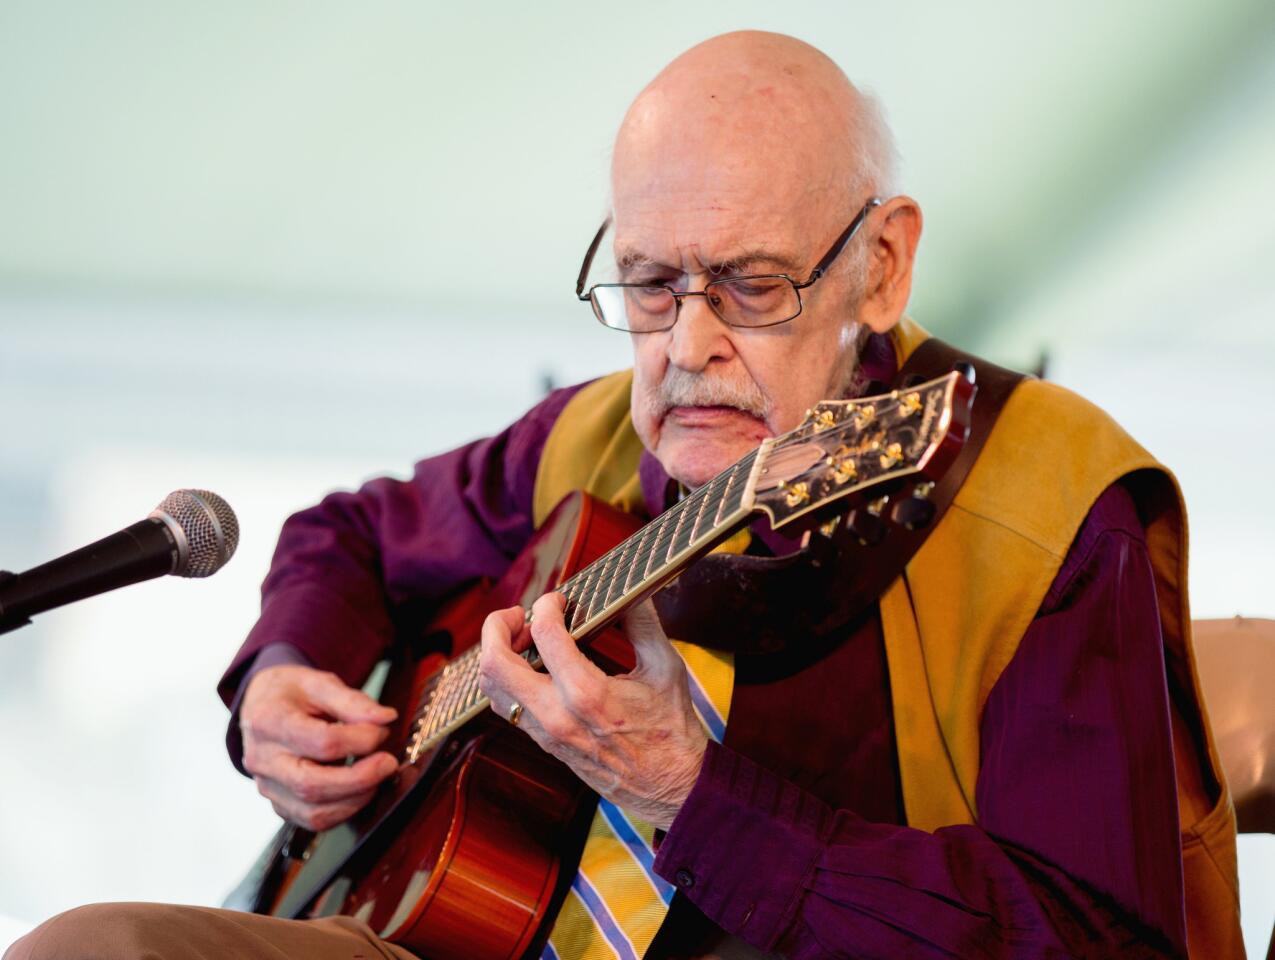 Jazz guitarist Jim Hall died in his sleep December 10, 2013 at the age of 83.